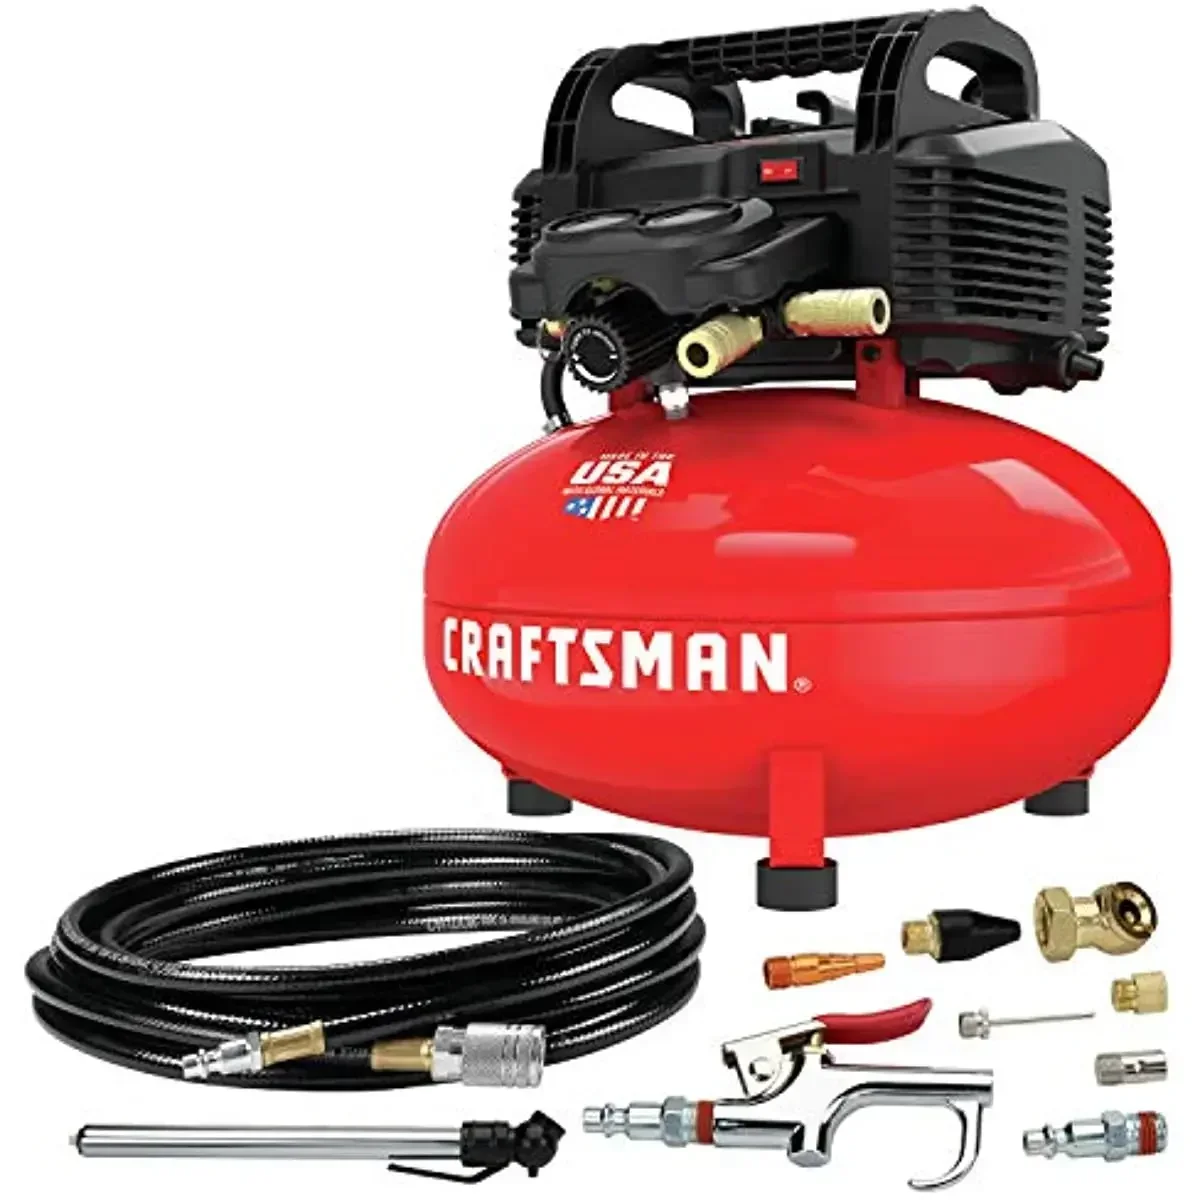 trimmer head with two bump knob for craftsman wc205 wc210 wc215 wc2200 ws205 ws210 ws215 ws2200 garden power tool Craftsman Air Compressor 6 Gallon Pancake Oil-Free with 13 Piece Accessory Kit (CMEC6150K)